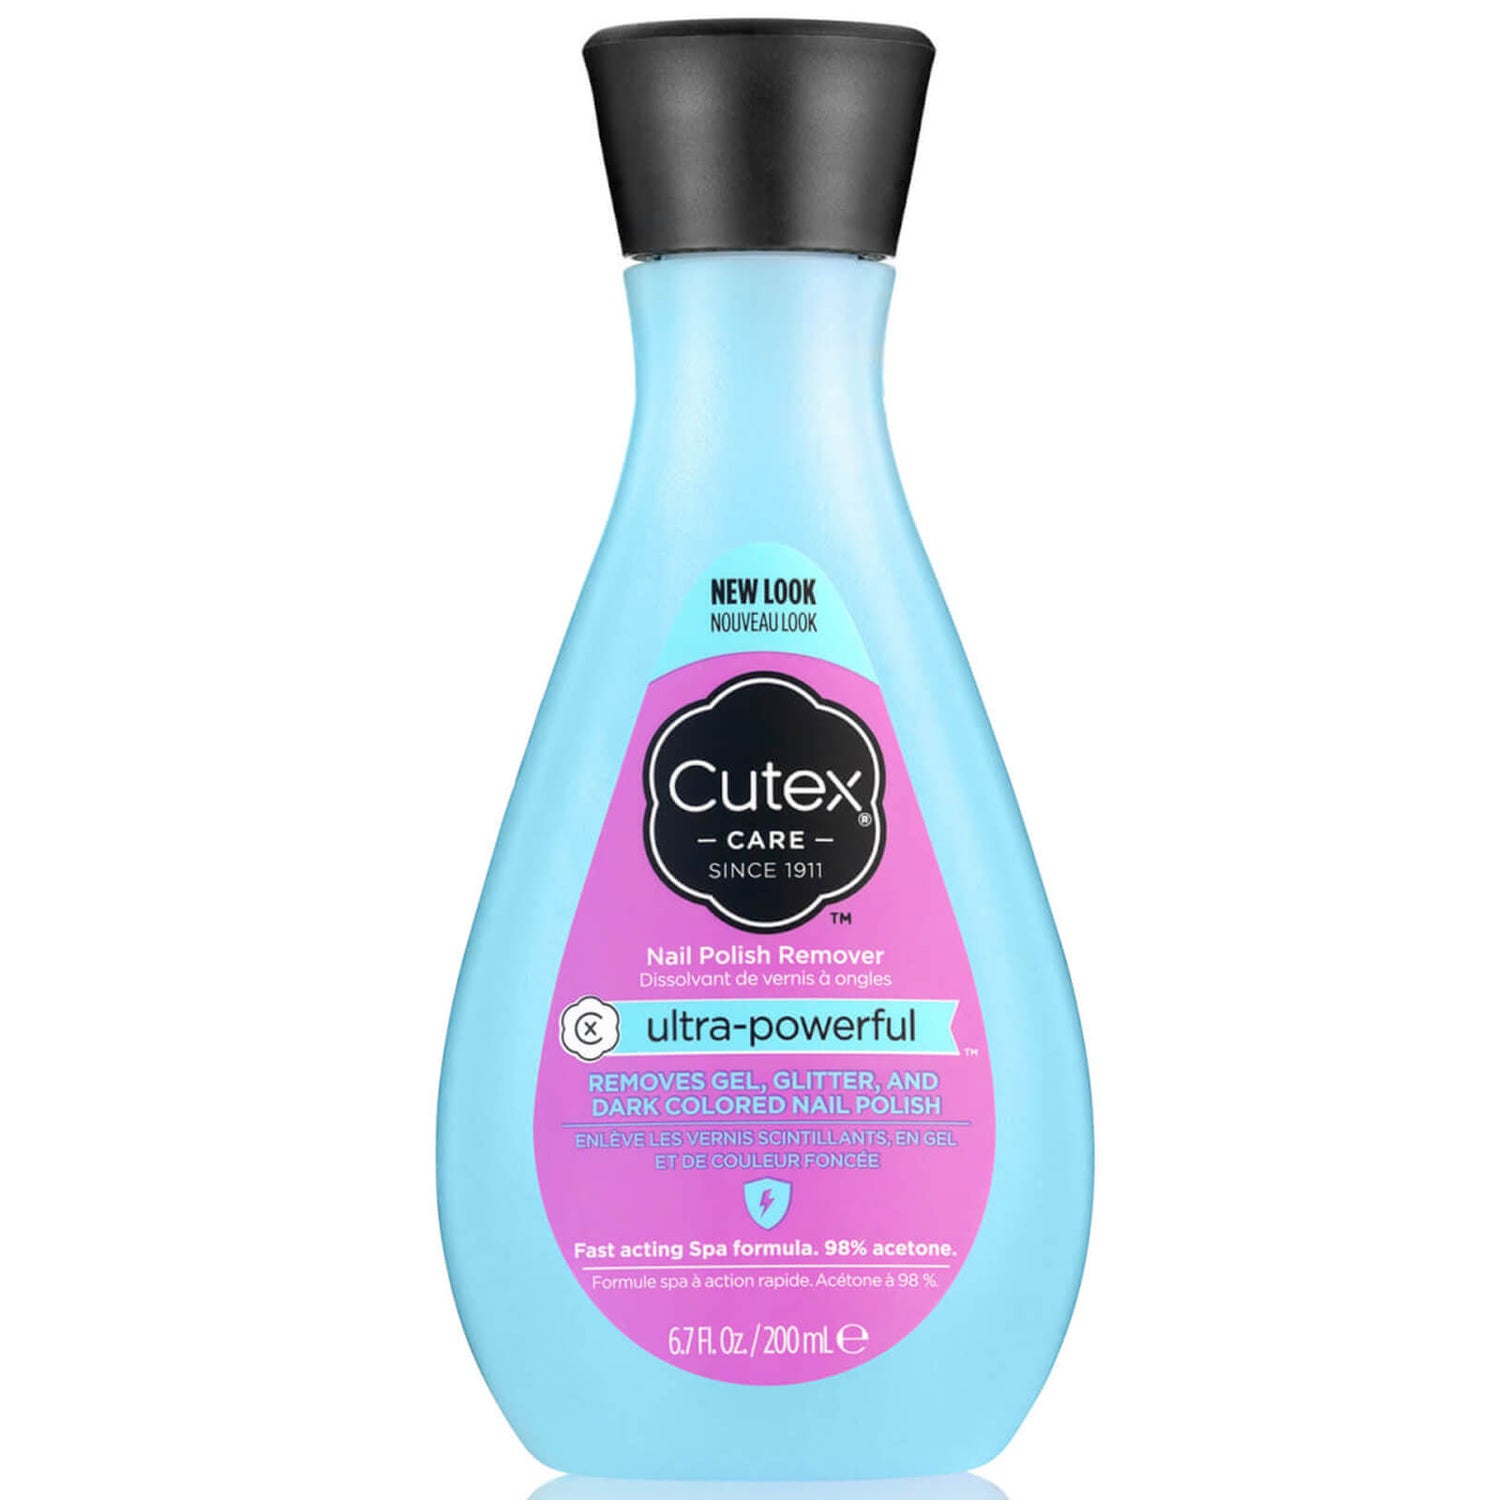 Cutex Ultra-Powerful Nail Polish Remover - 200ml - FREE Delivery